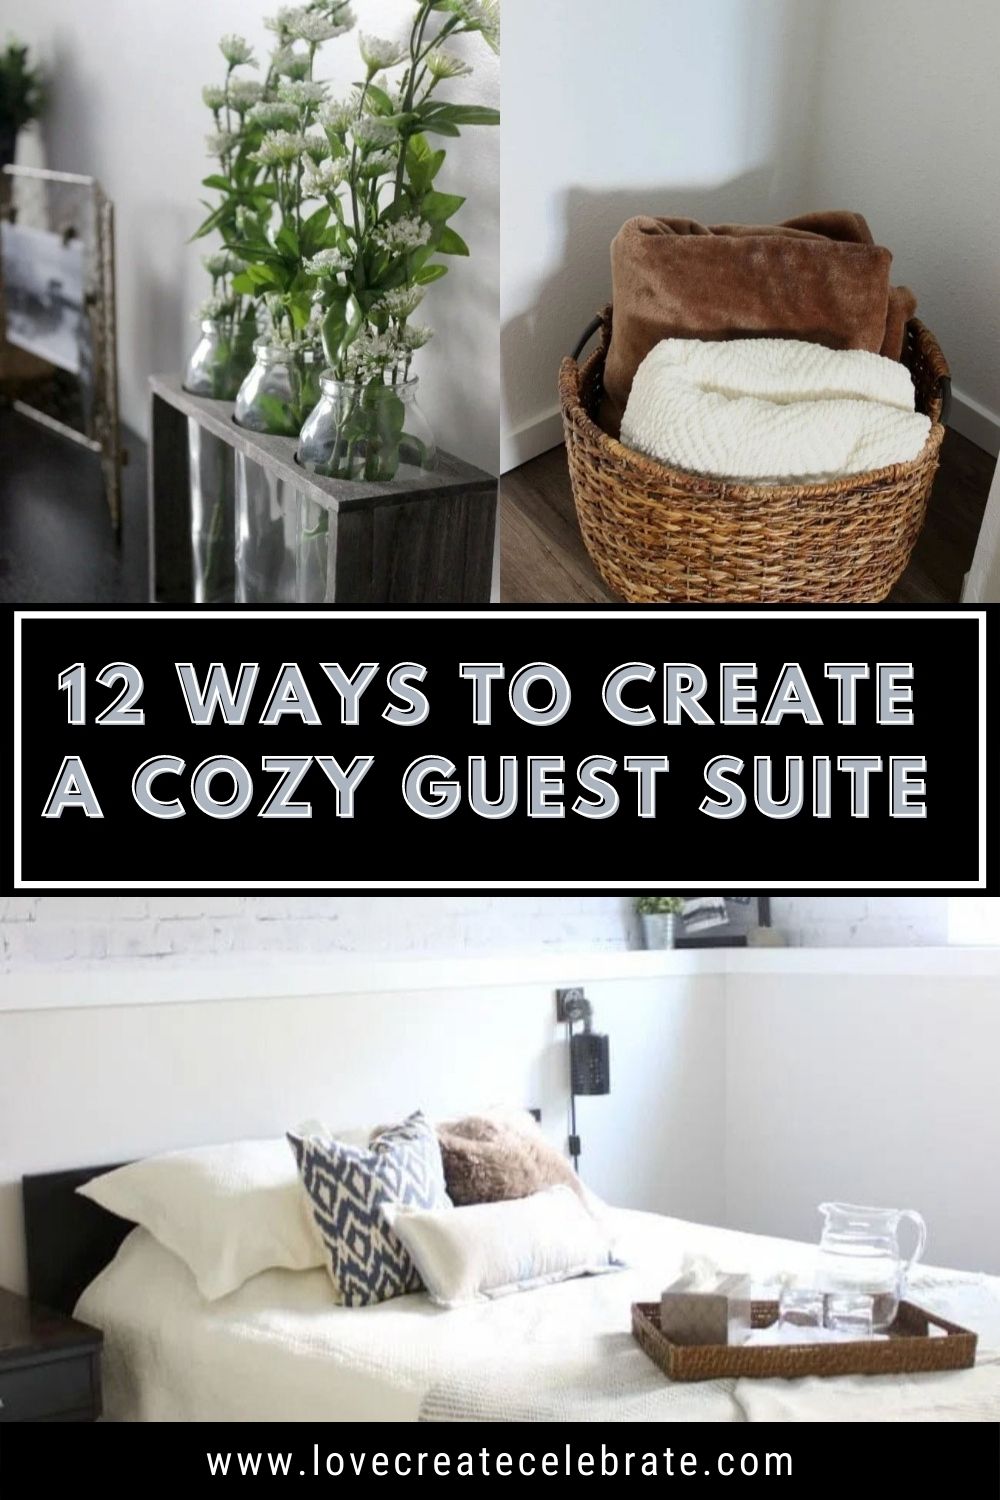 Image collage of guest bedroom items with text overlay "12 ways to create a cozy guest suite"